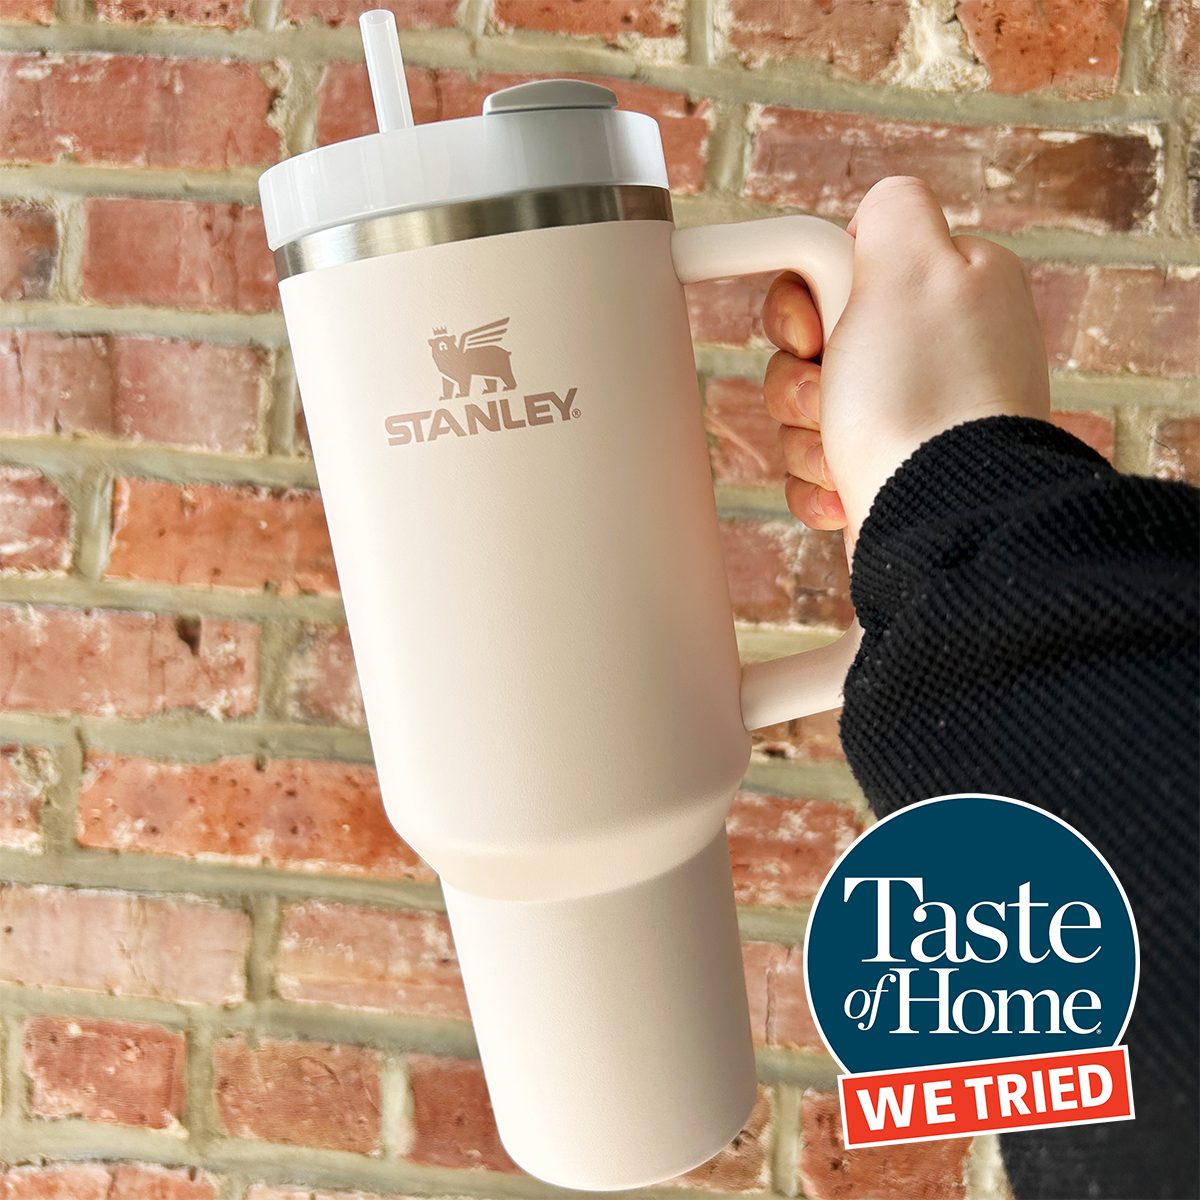 Stanley Quencher review: Does it live up to the hype?